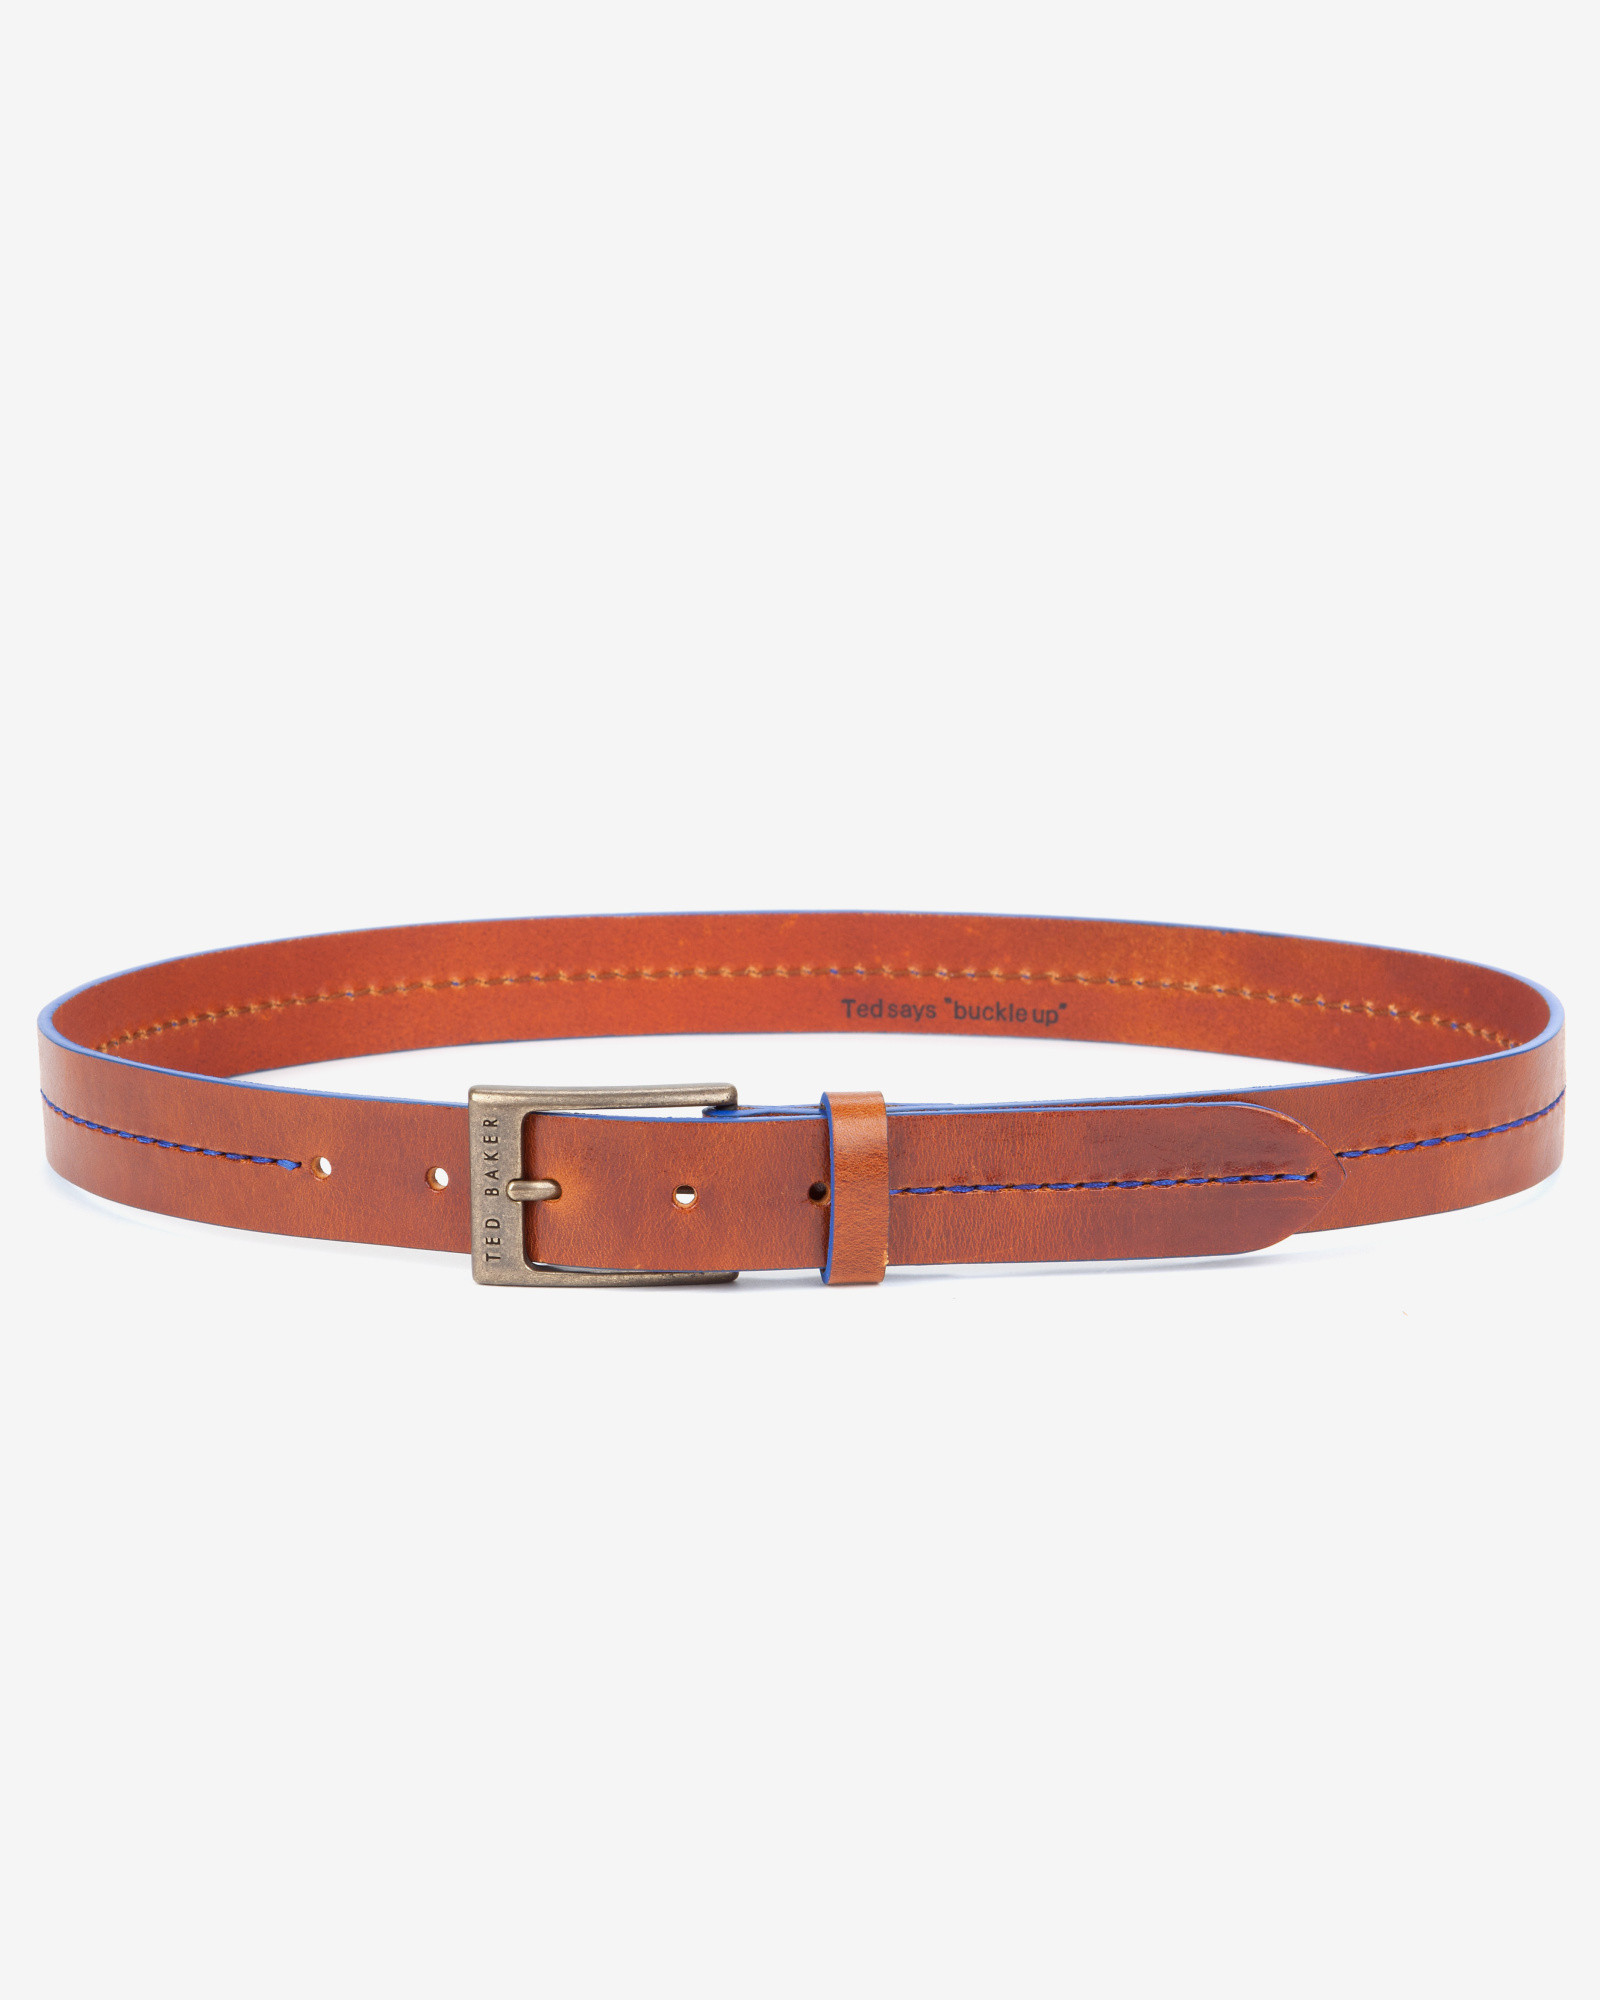 Ted Baker Stitched Leather Belt in Tan (Brown) for Men - Lyst